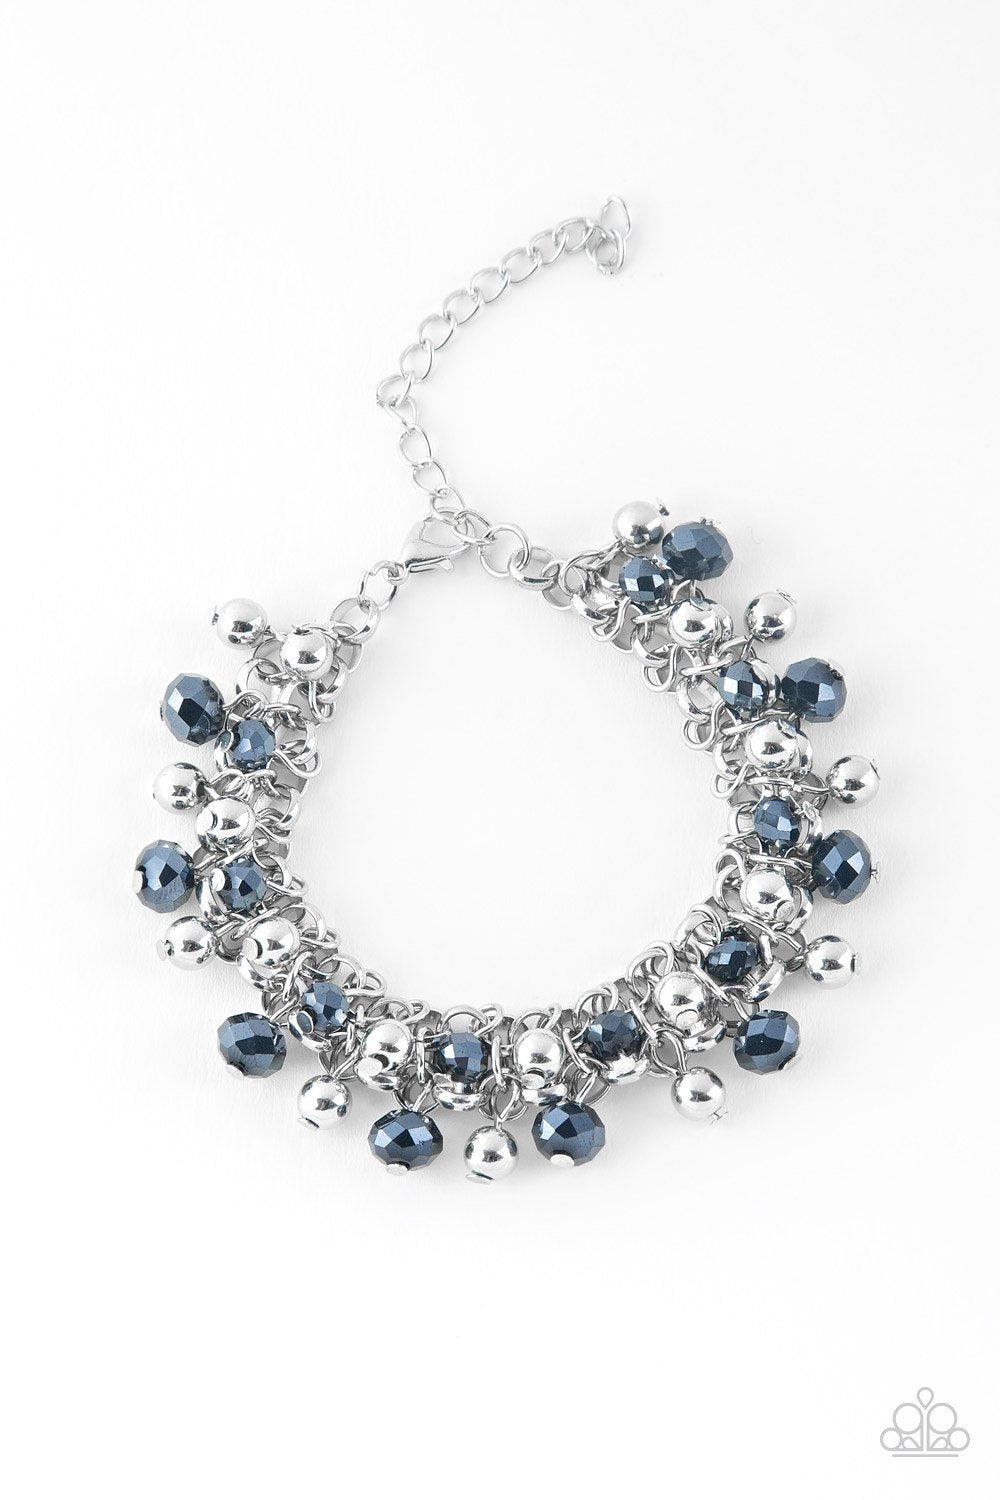 Just For The Fund Of It Metallic Blue and Silver Bracelet - Paparazzi Accessories-CarasShop.com - $5 Jewelry by Cara Jewels